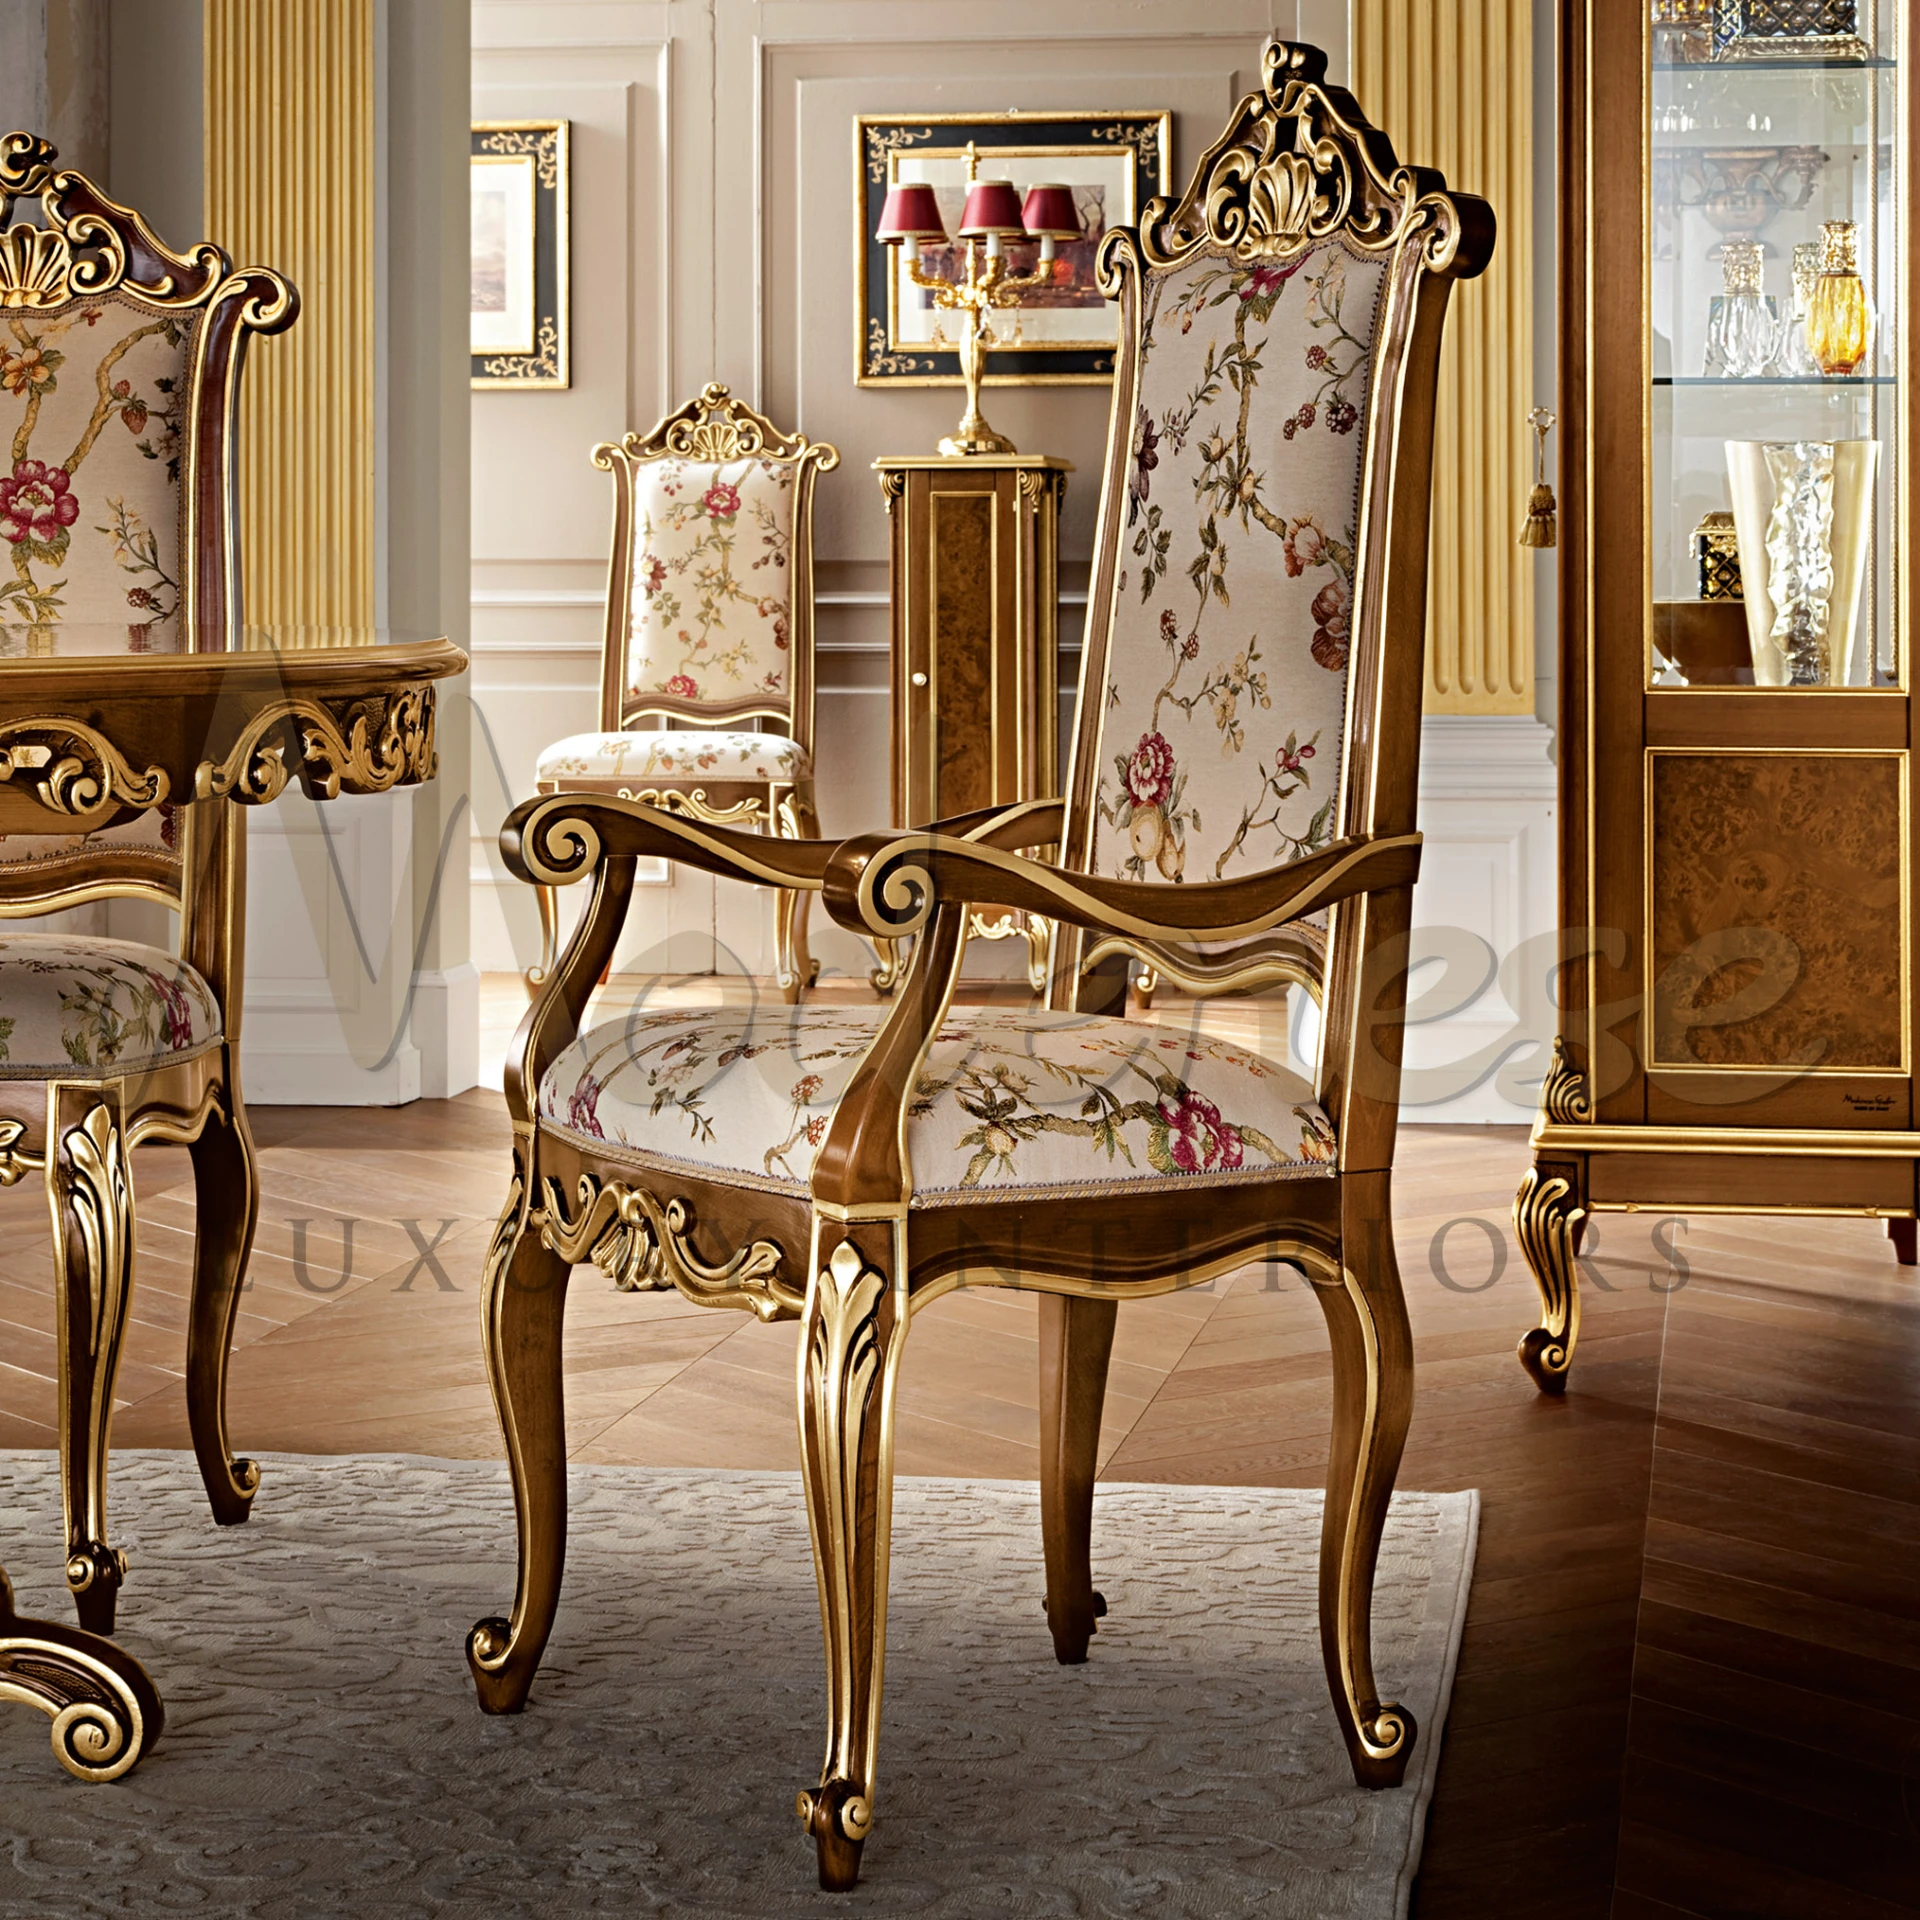 Indulge in luxury with our majestic armchair, boasting gold leaf detailing, walnut finish, and plush floral upholstery.